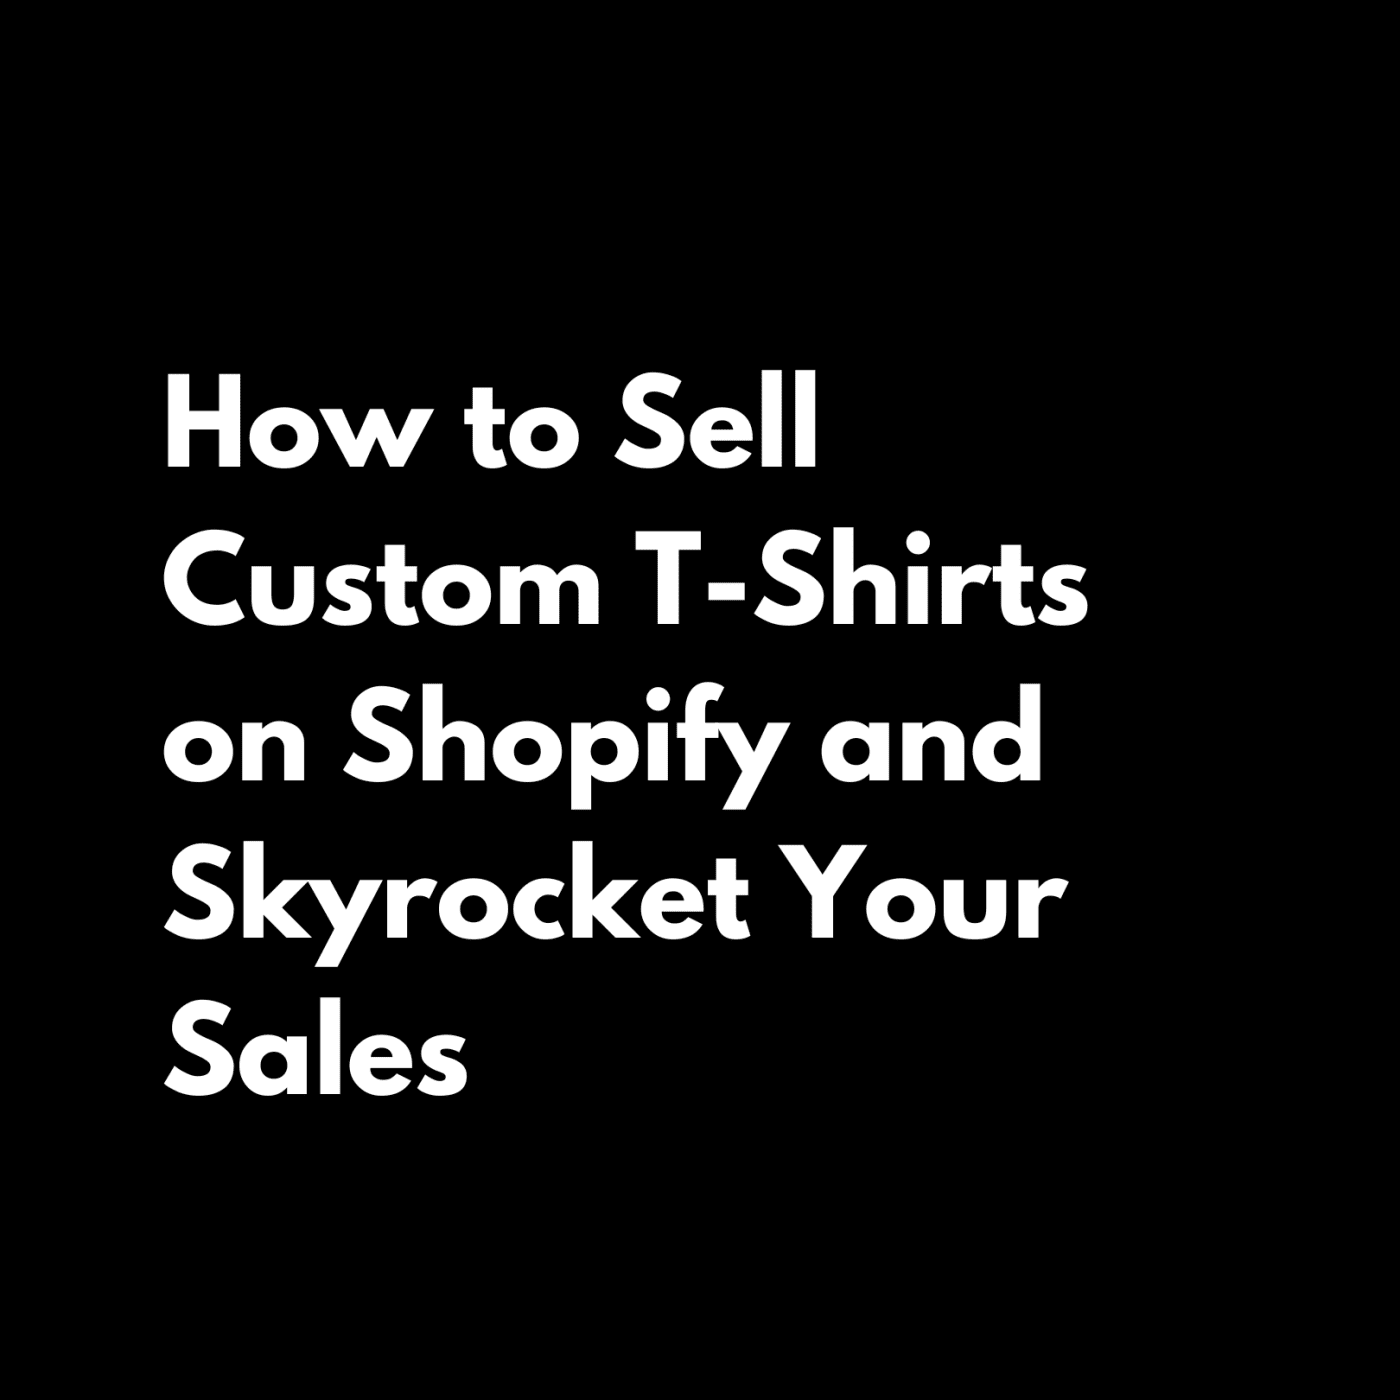 Custom t-shirts are a great way to express your unique style or promote your brand. With Shopify, you can create an online store and sell your custom t-shirts to a global audience. In this blog, we will provide you with some tips on how to sell custom t-shirts on Shopify and skyrocket your sales.